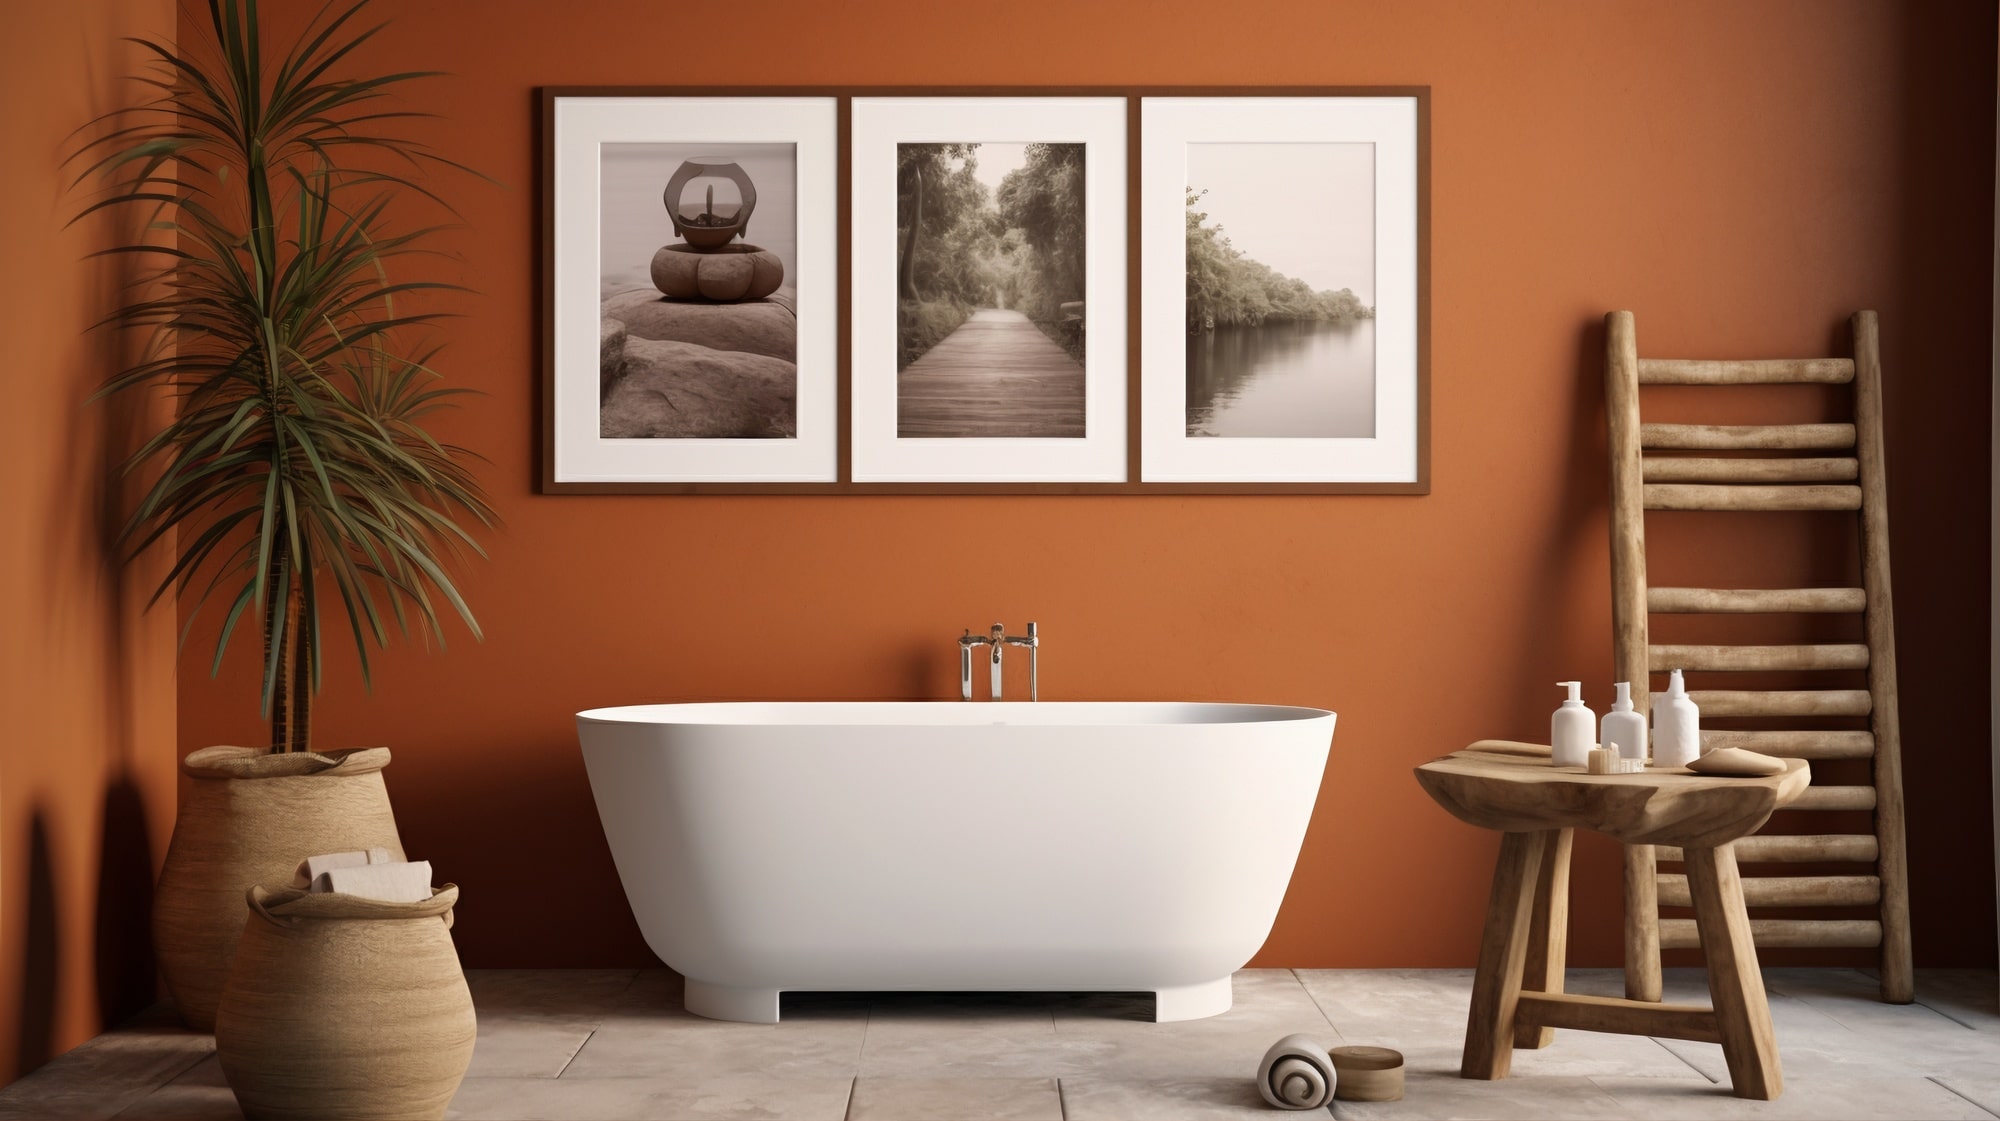 Decorative Accessories for Bathroom: Gift Ideas for a Cozy and Warm Atmosphere